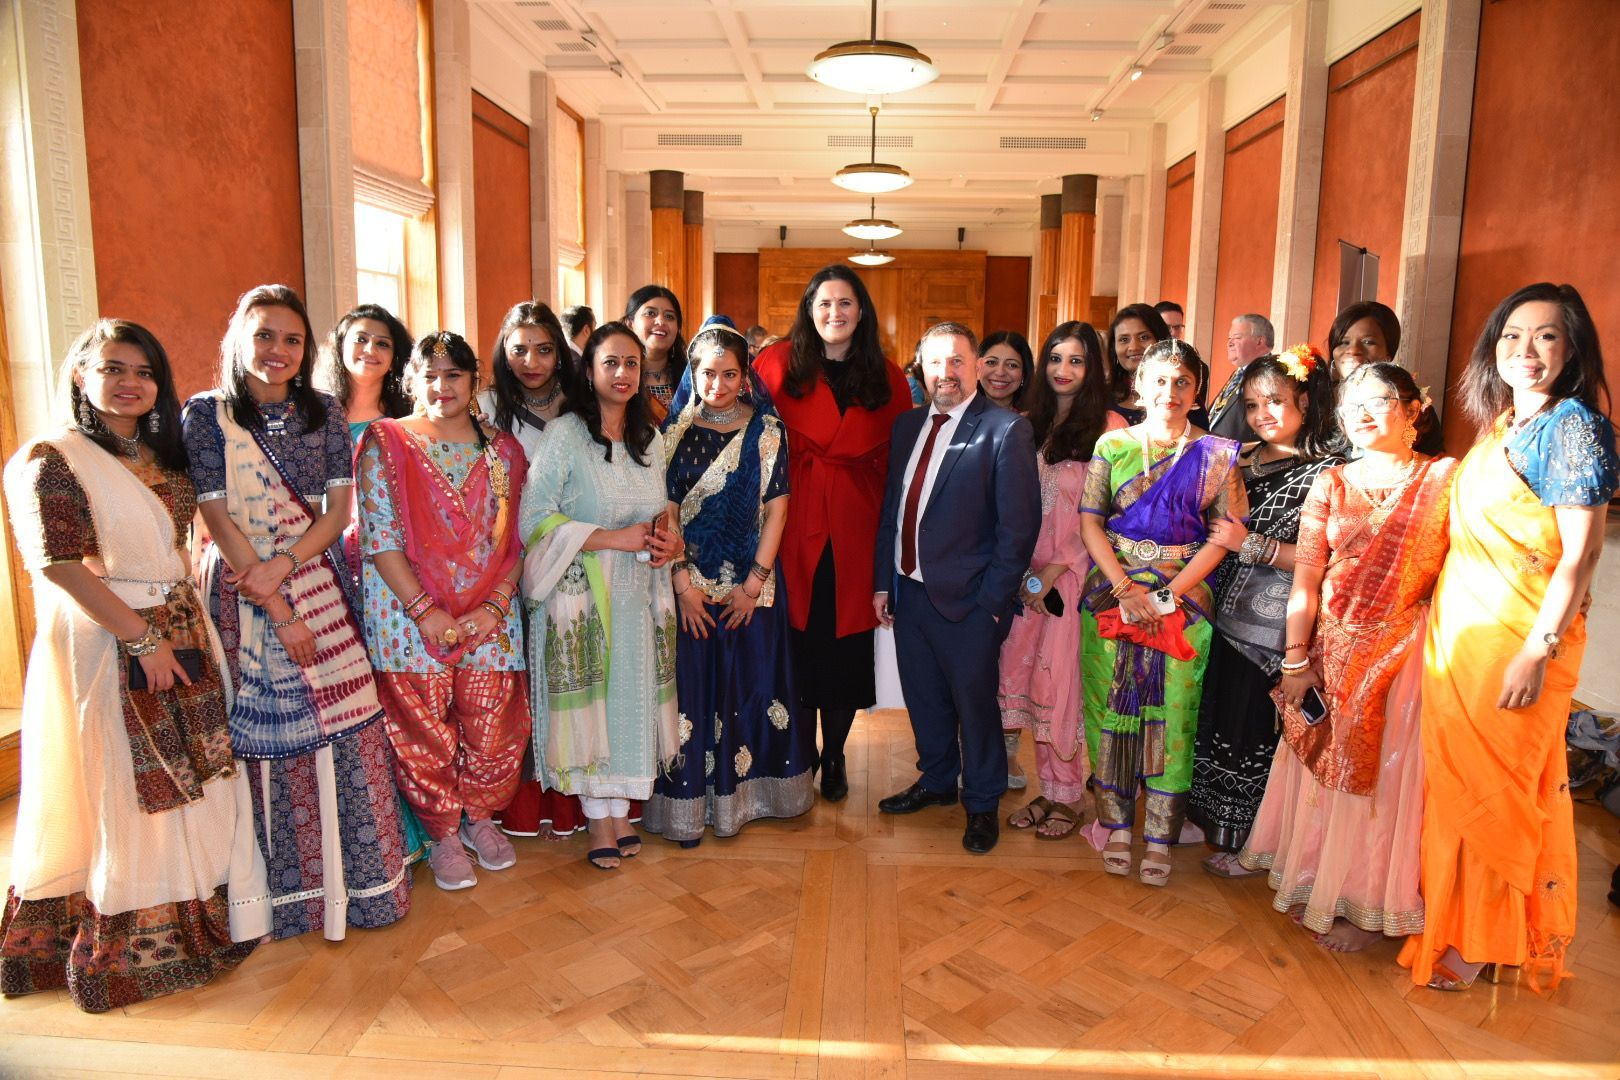 INDIAN CULTURE: The event was held at the Long Gallery in Parliament Buildings at Stormont